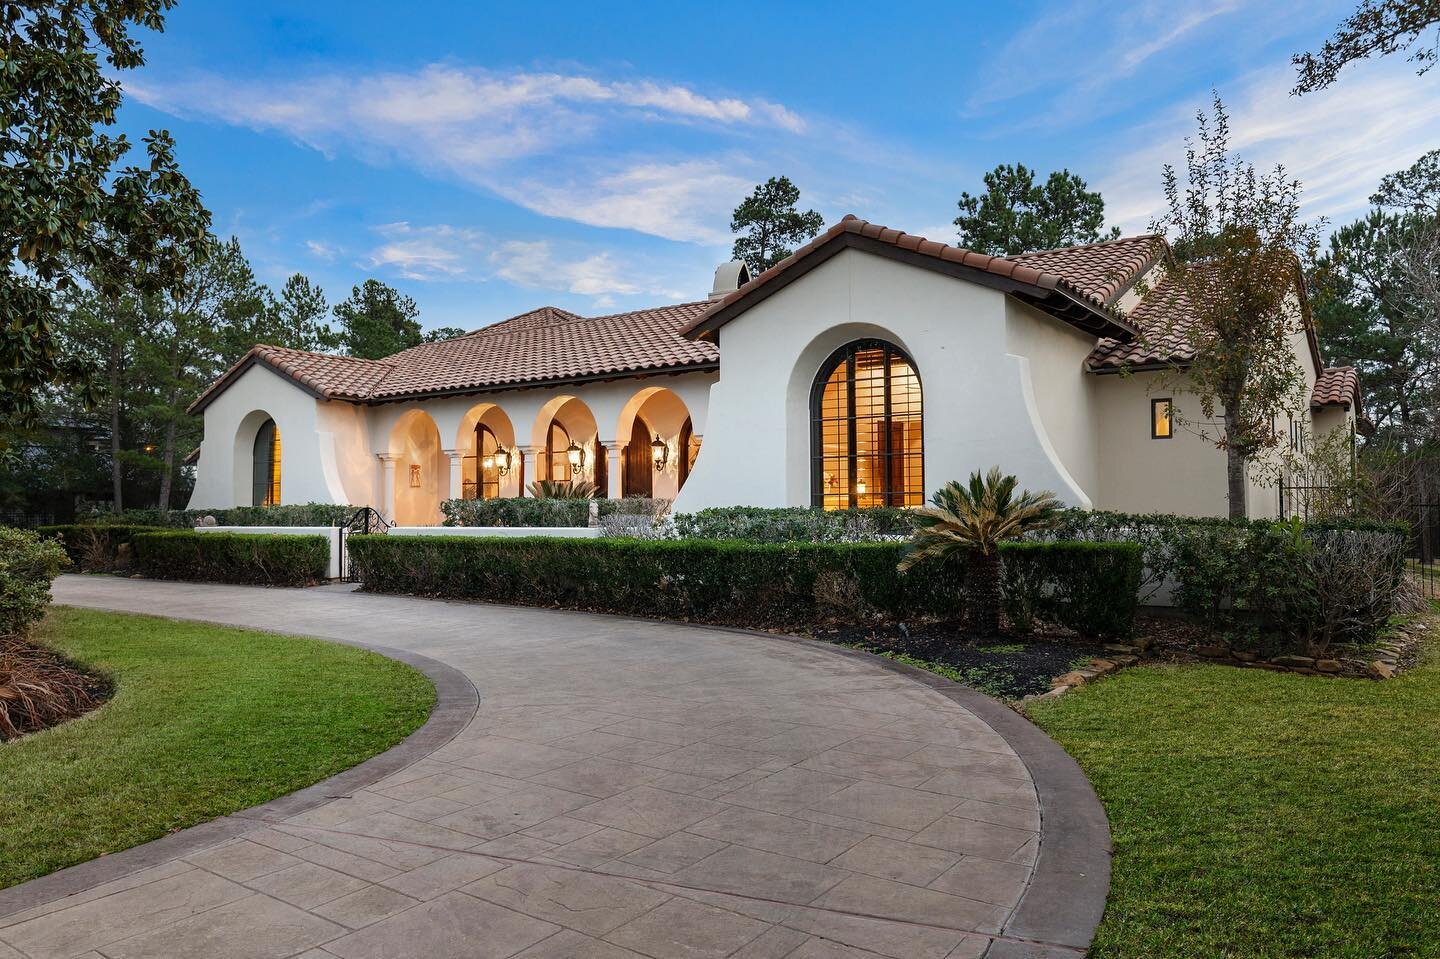 This stunning home was built by renowned custom builder Robin Reuby.

30 S Gary Glen Circle | The Woodlands, TX
✨Listed at 2.1M✨

DM for more information.
@rendon_team